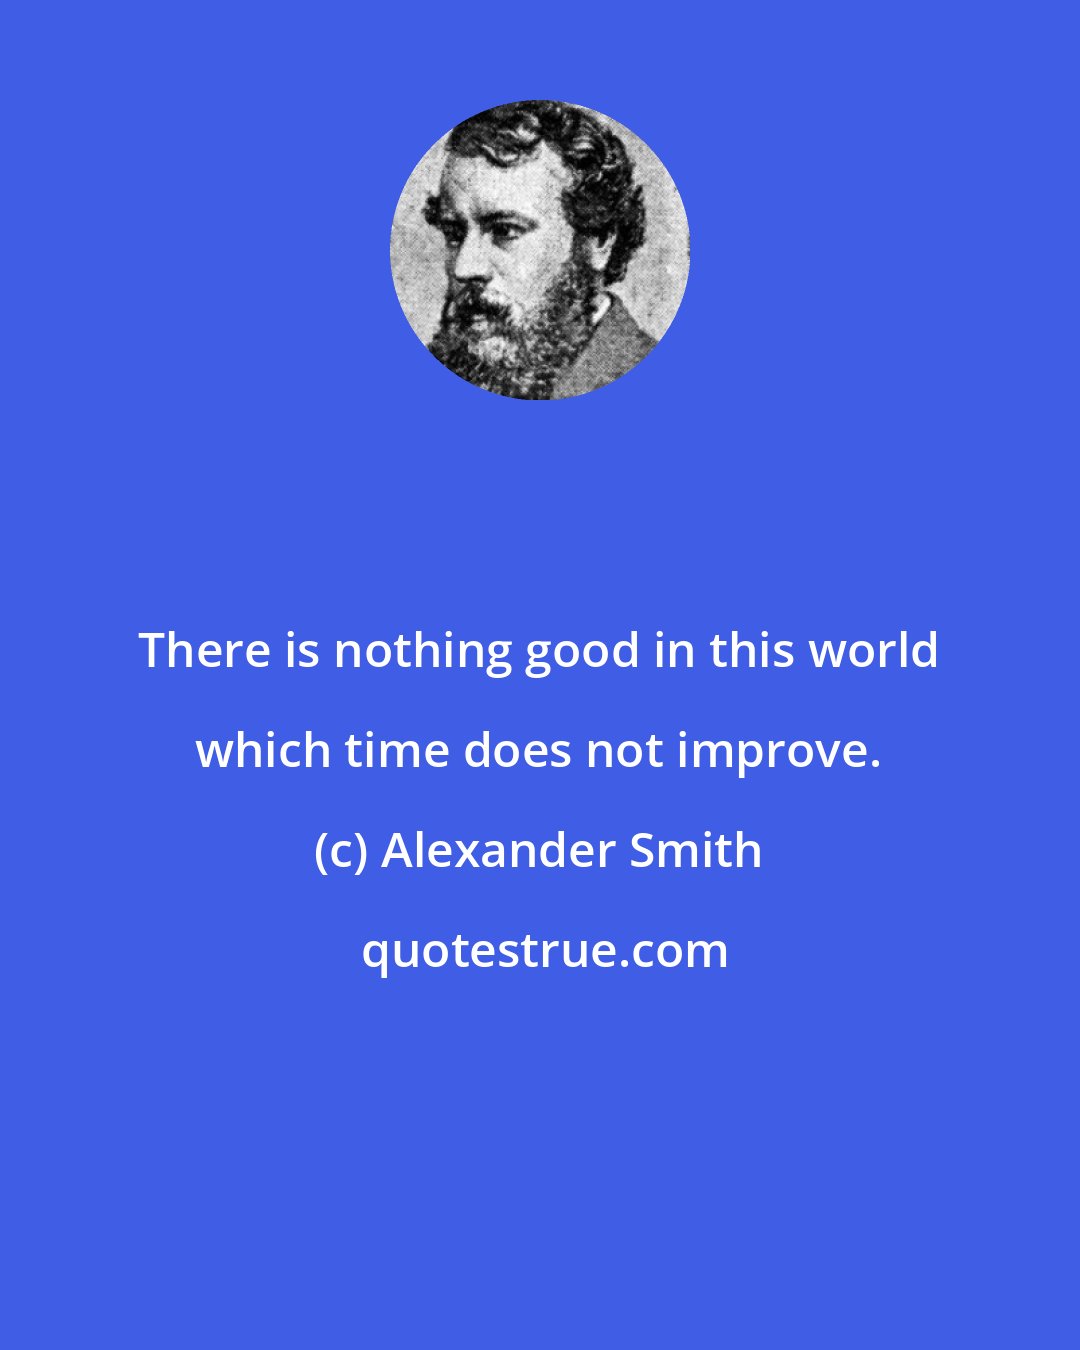 Alexander Smith: There is nothing good in this world which time does not improve.